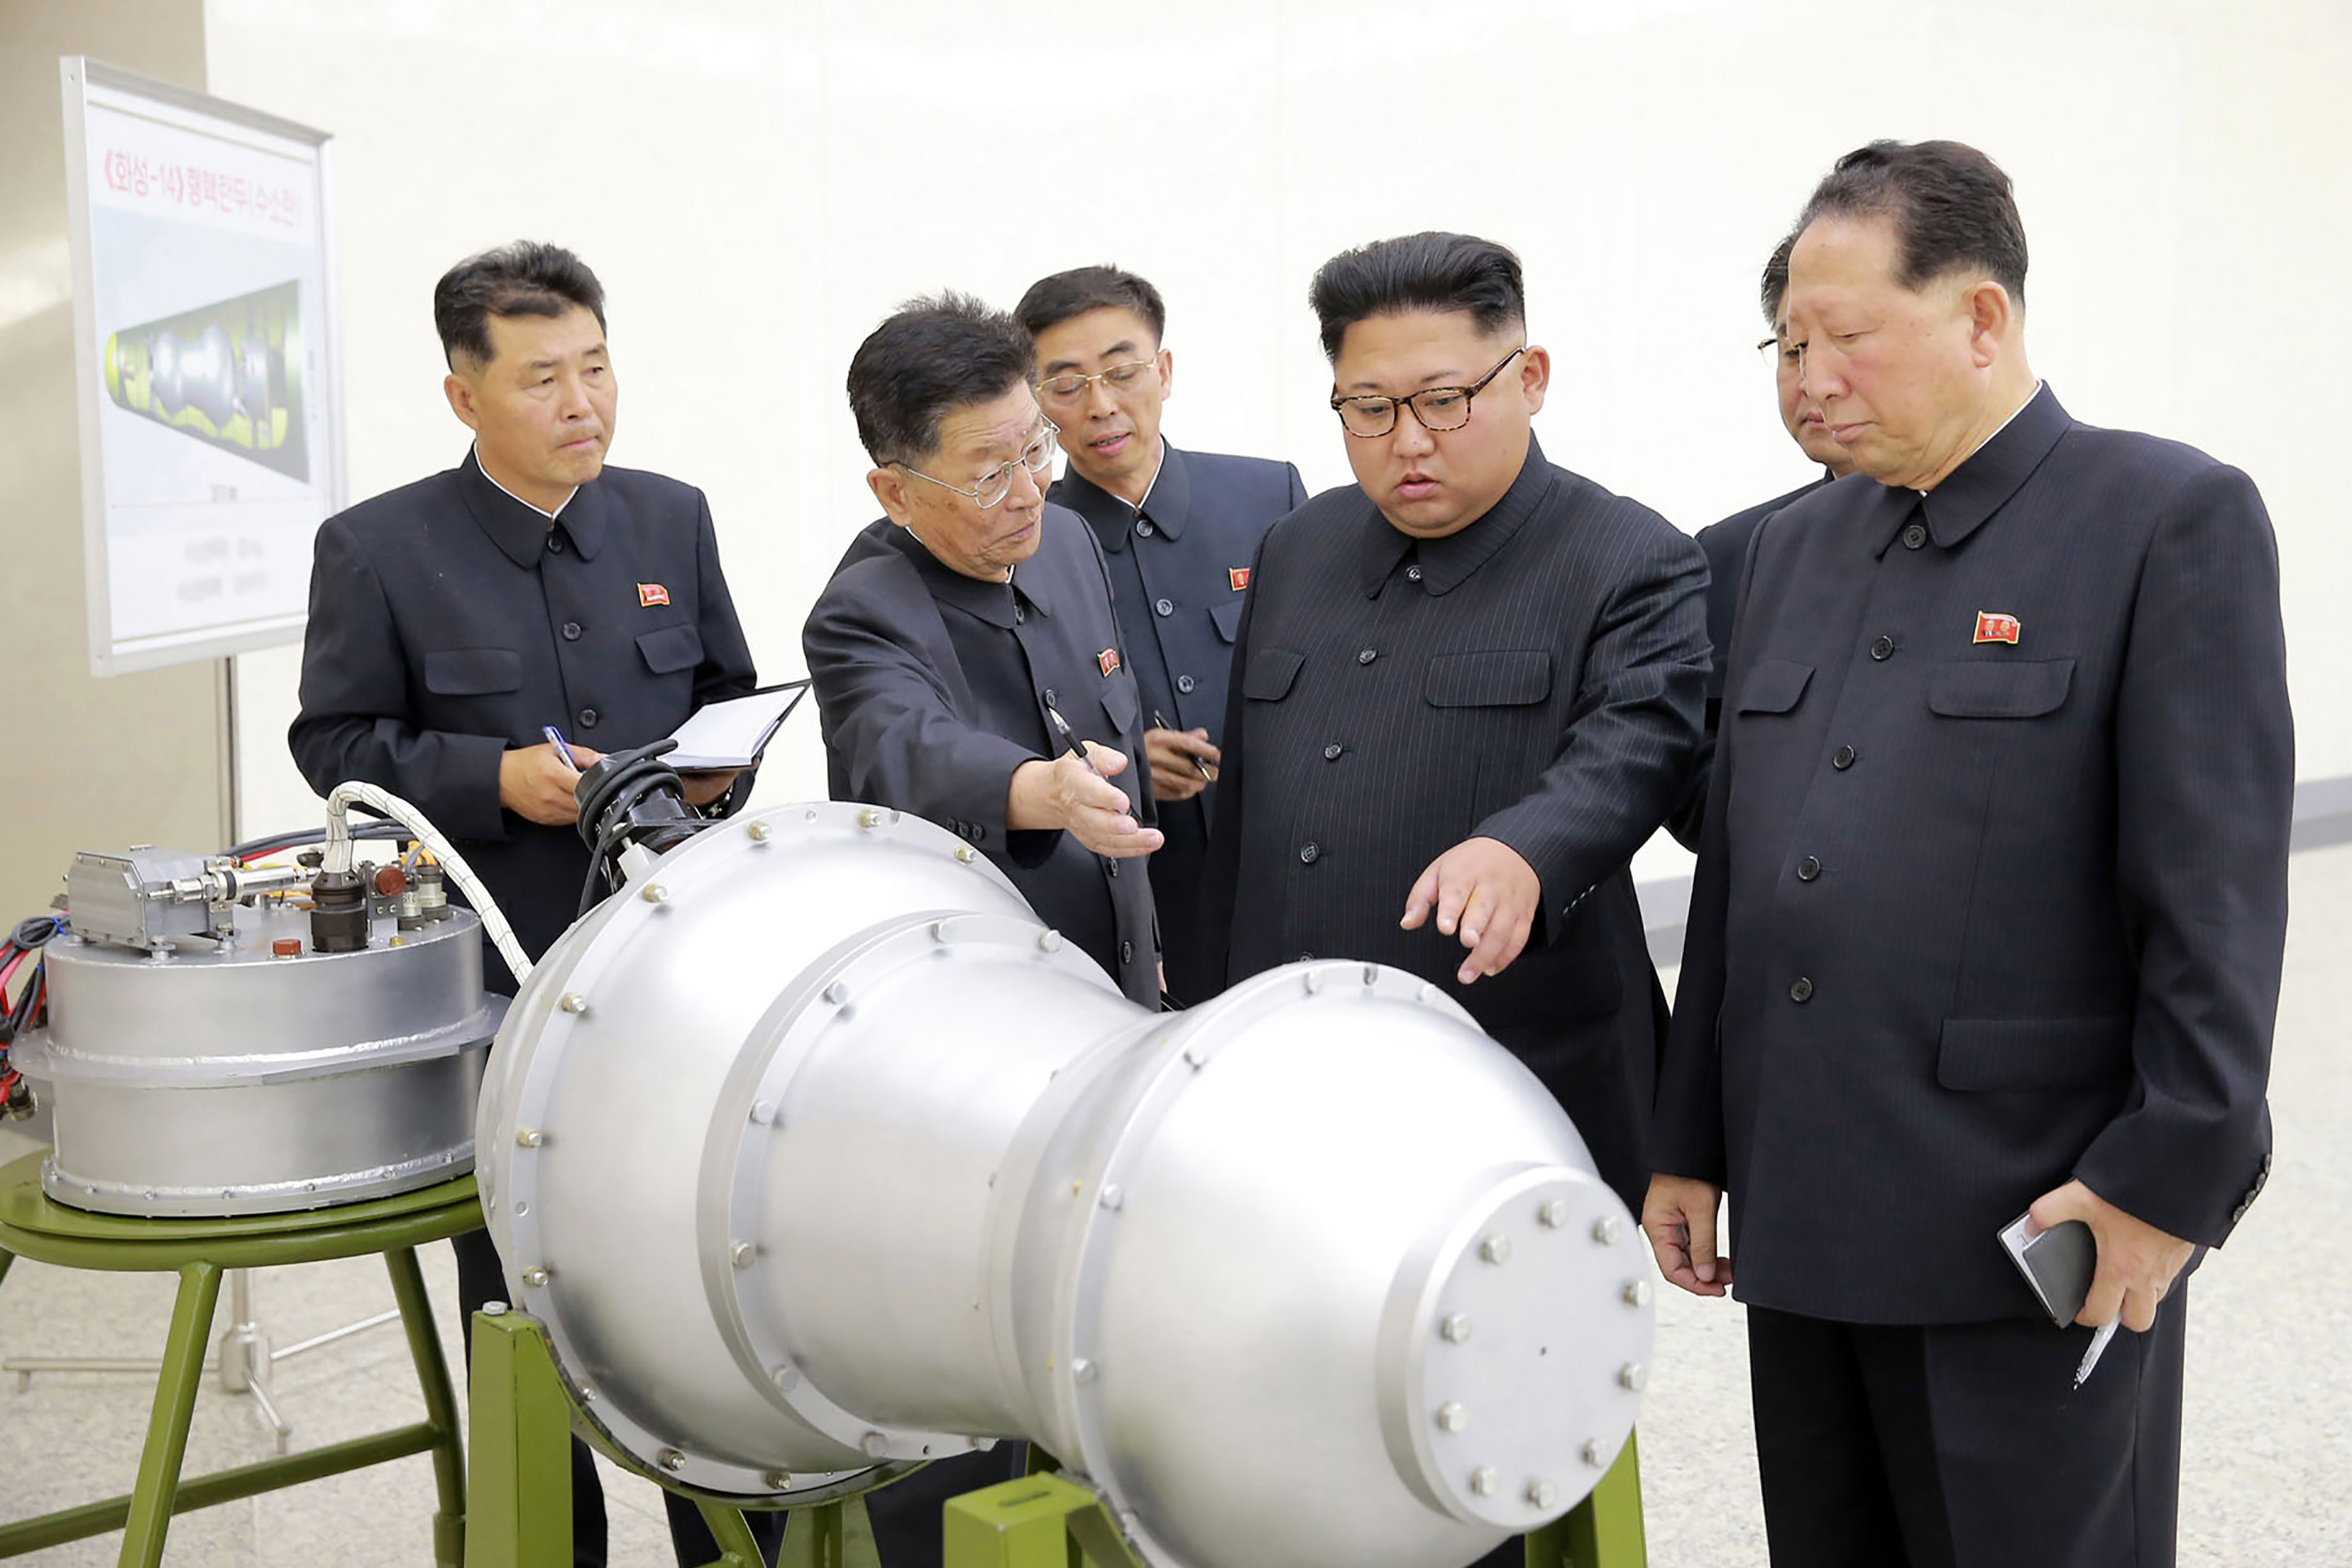 This undated picture released by North Korea's official Korean Central News Agency (KCNA) on September 3, 2017 shows North Korean leader Kim Jong-Un looking at a metal casing with two bulges at an undisclosed location. (AFP/Getty Images)